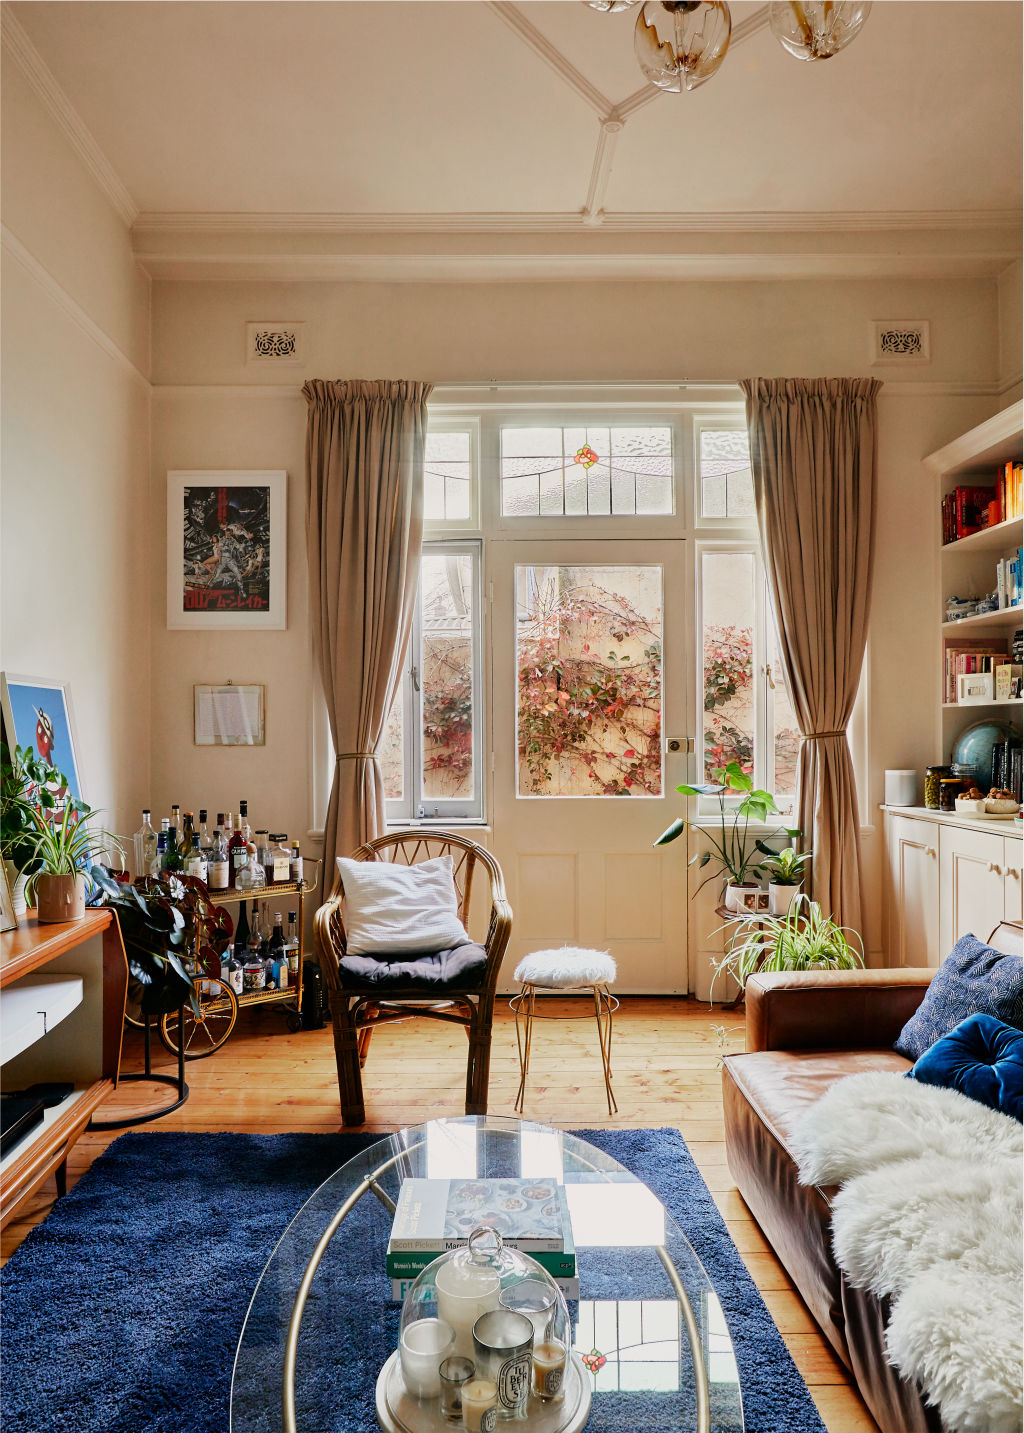 The bright and happpy lounge room. Photo: Amelia Stanwix Photography